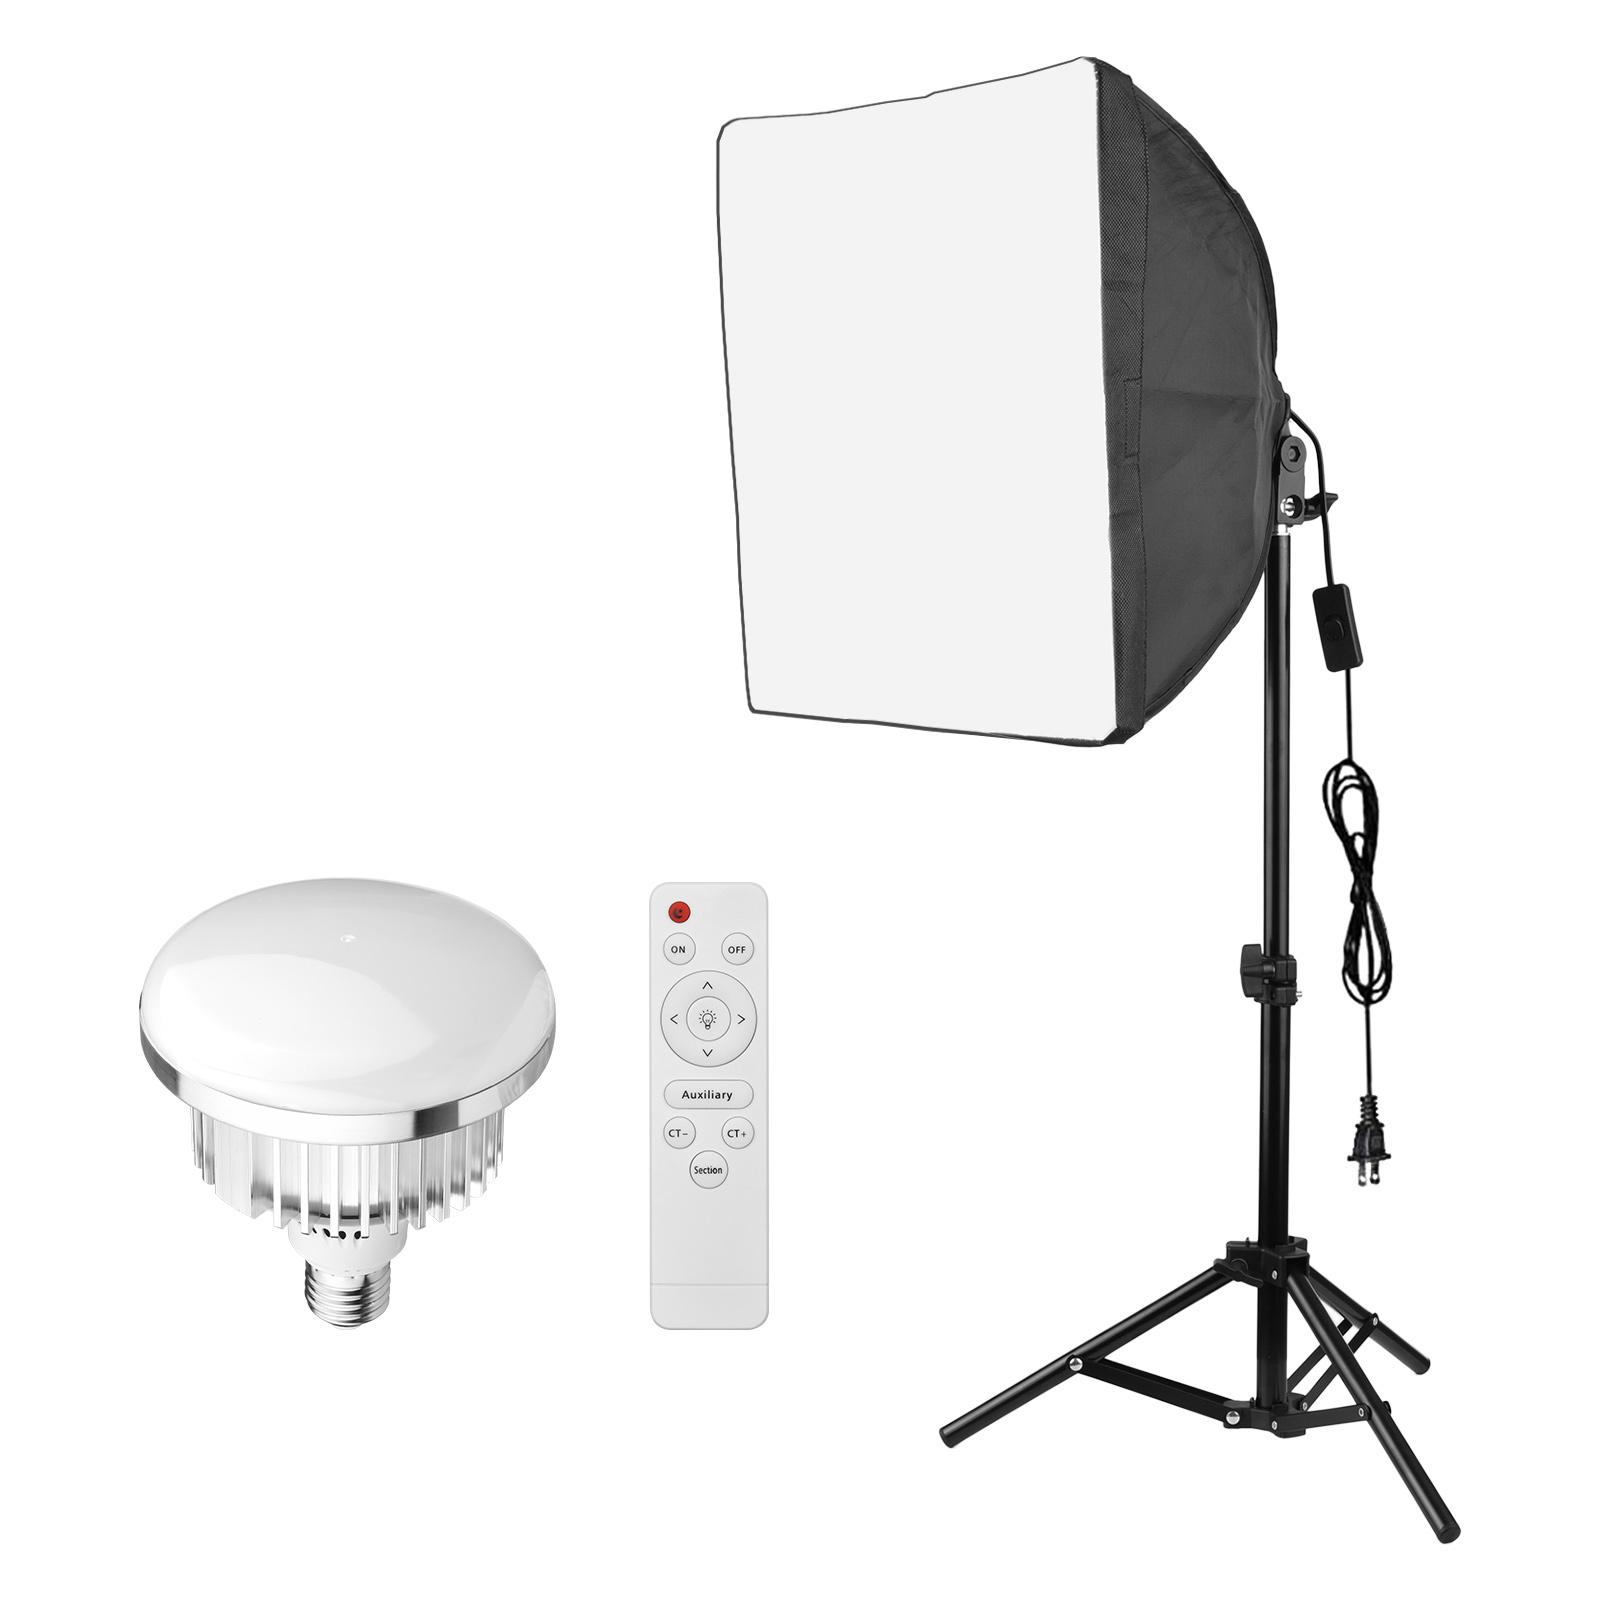 TOMTOP JMS Compact Photography Light kit Softbox Lighting Set with 45W 3200K-5600K Bi-color Temperature LED